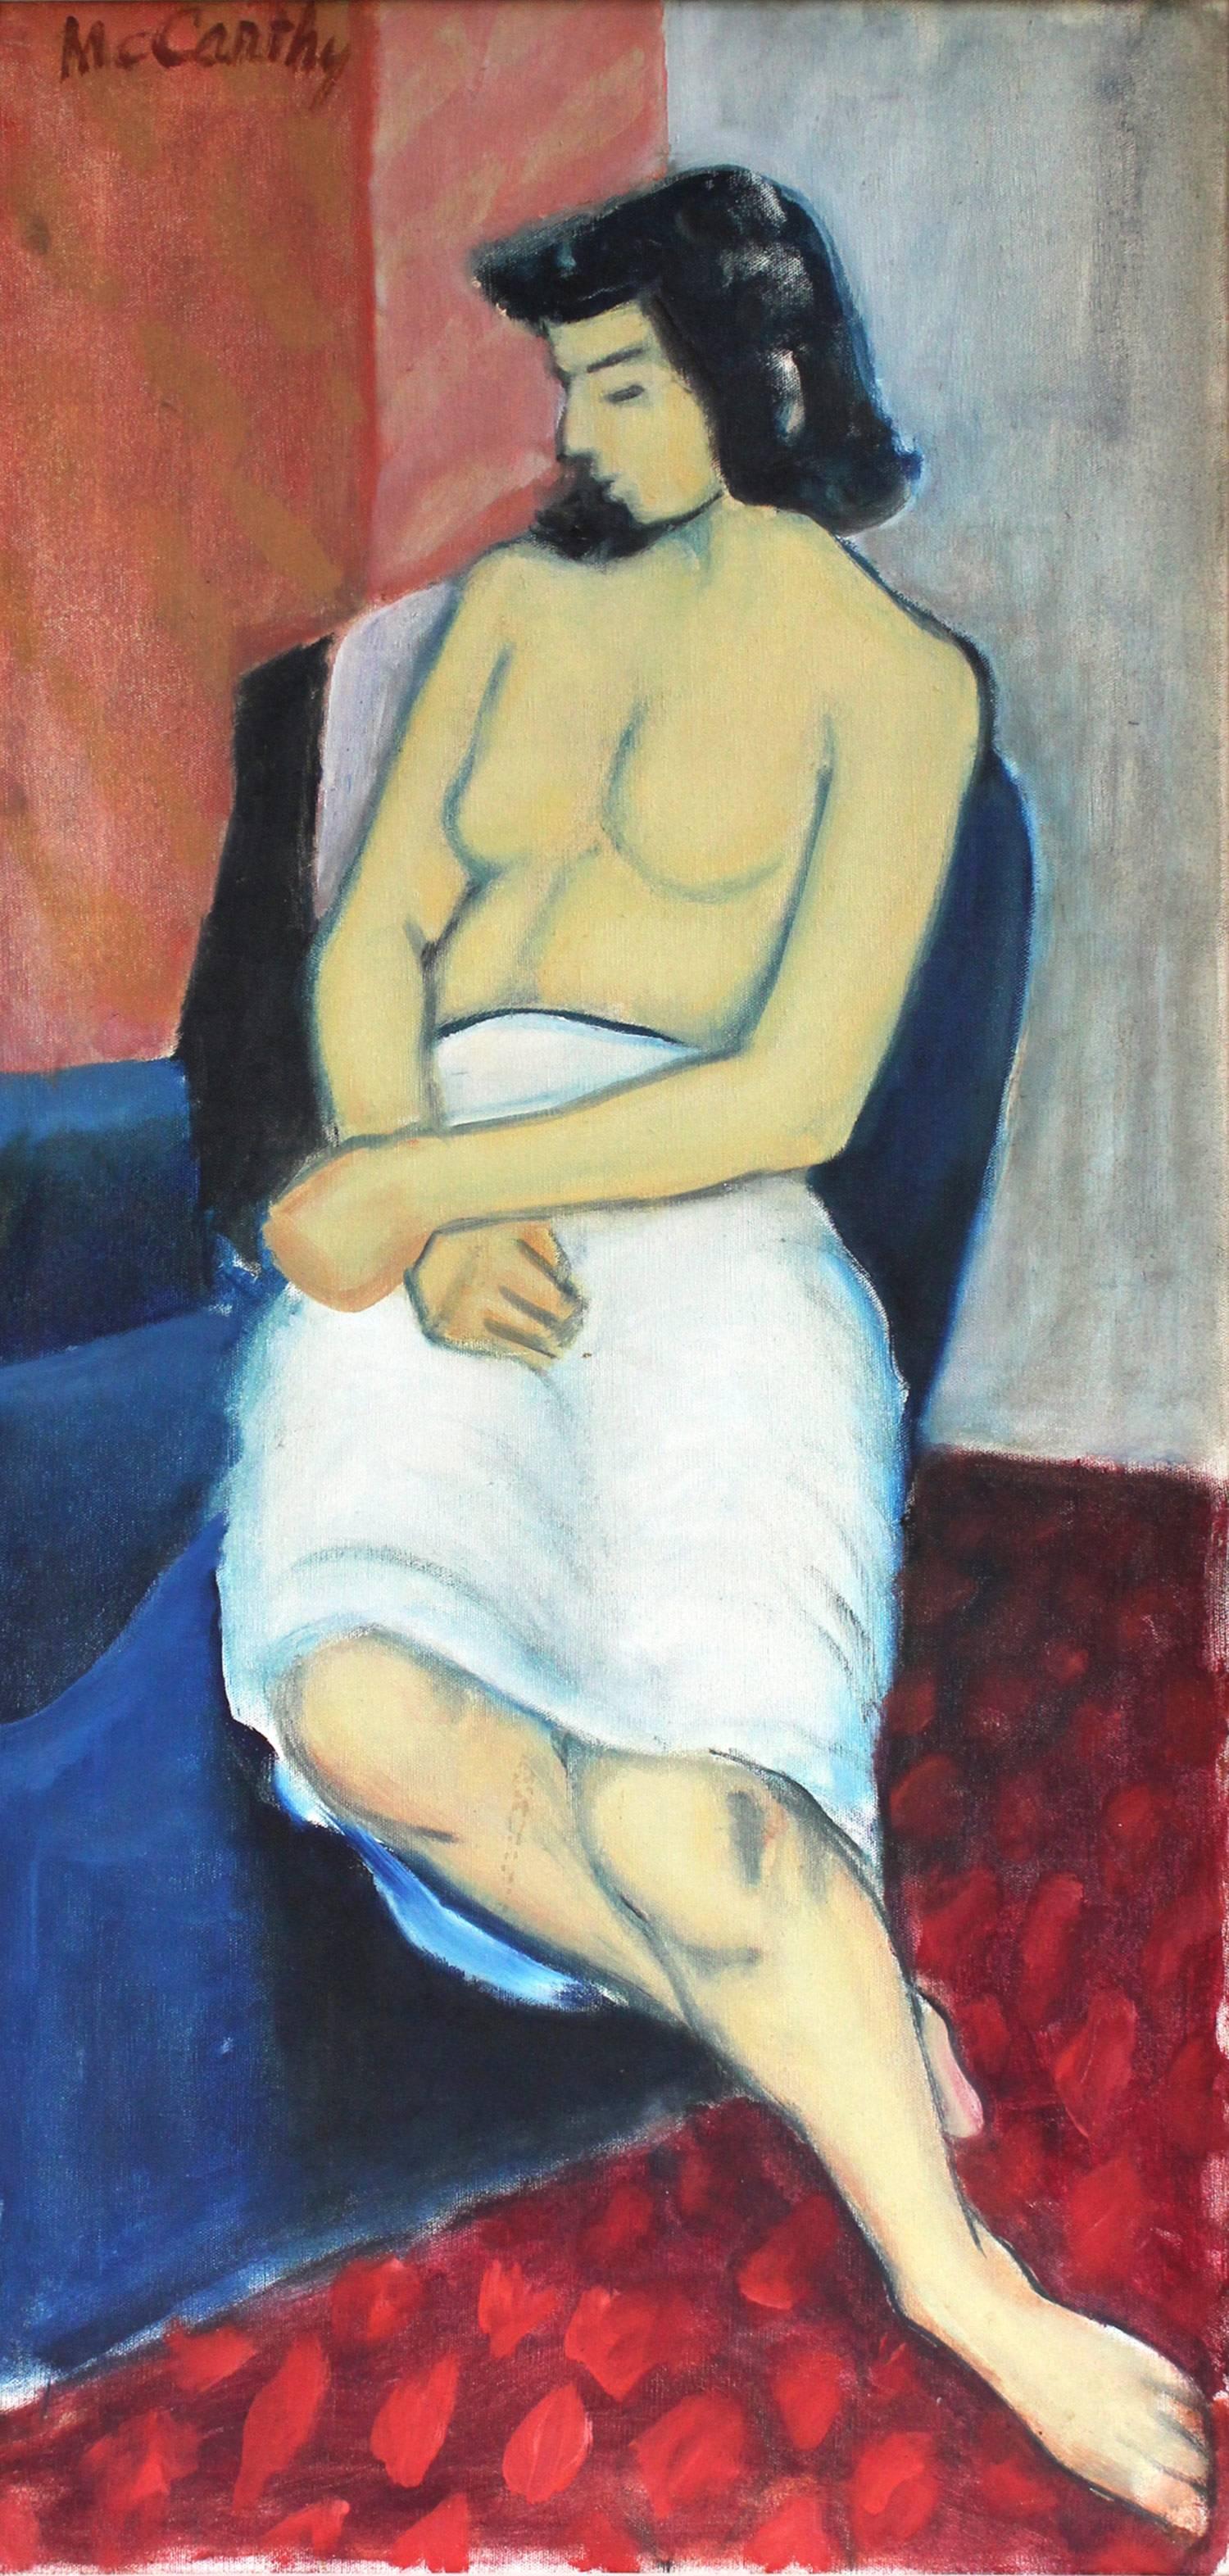 The Seated Woman, Figure Study - Painting by Francis McCarthy